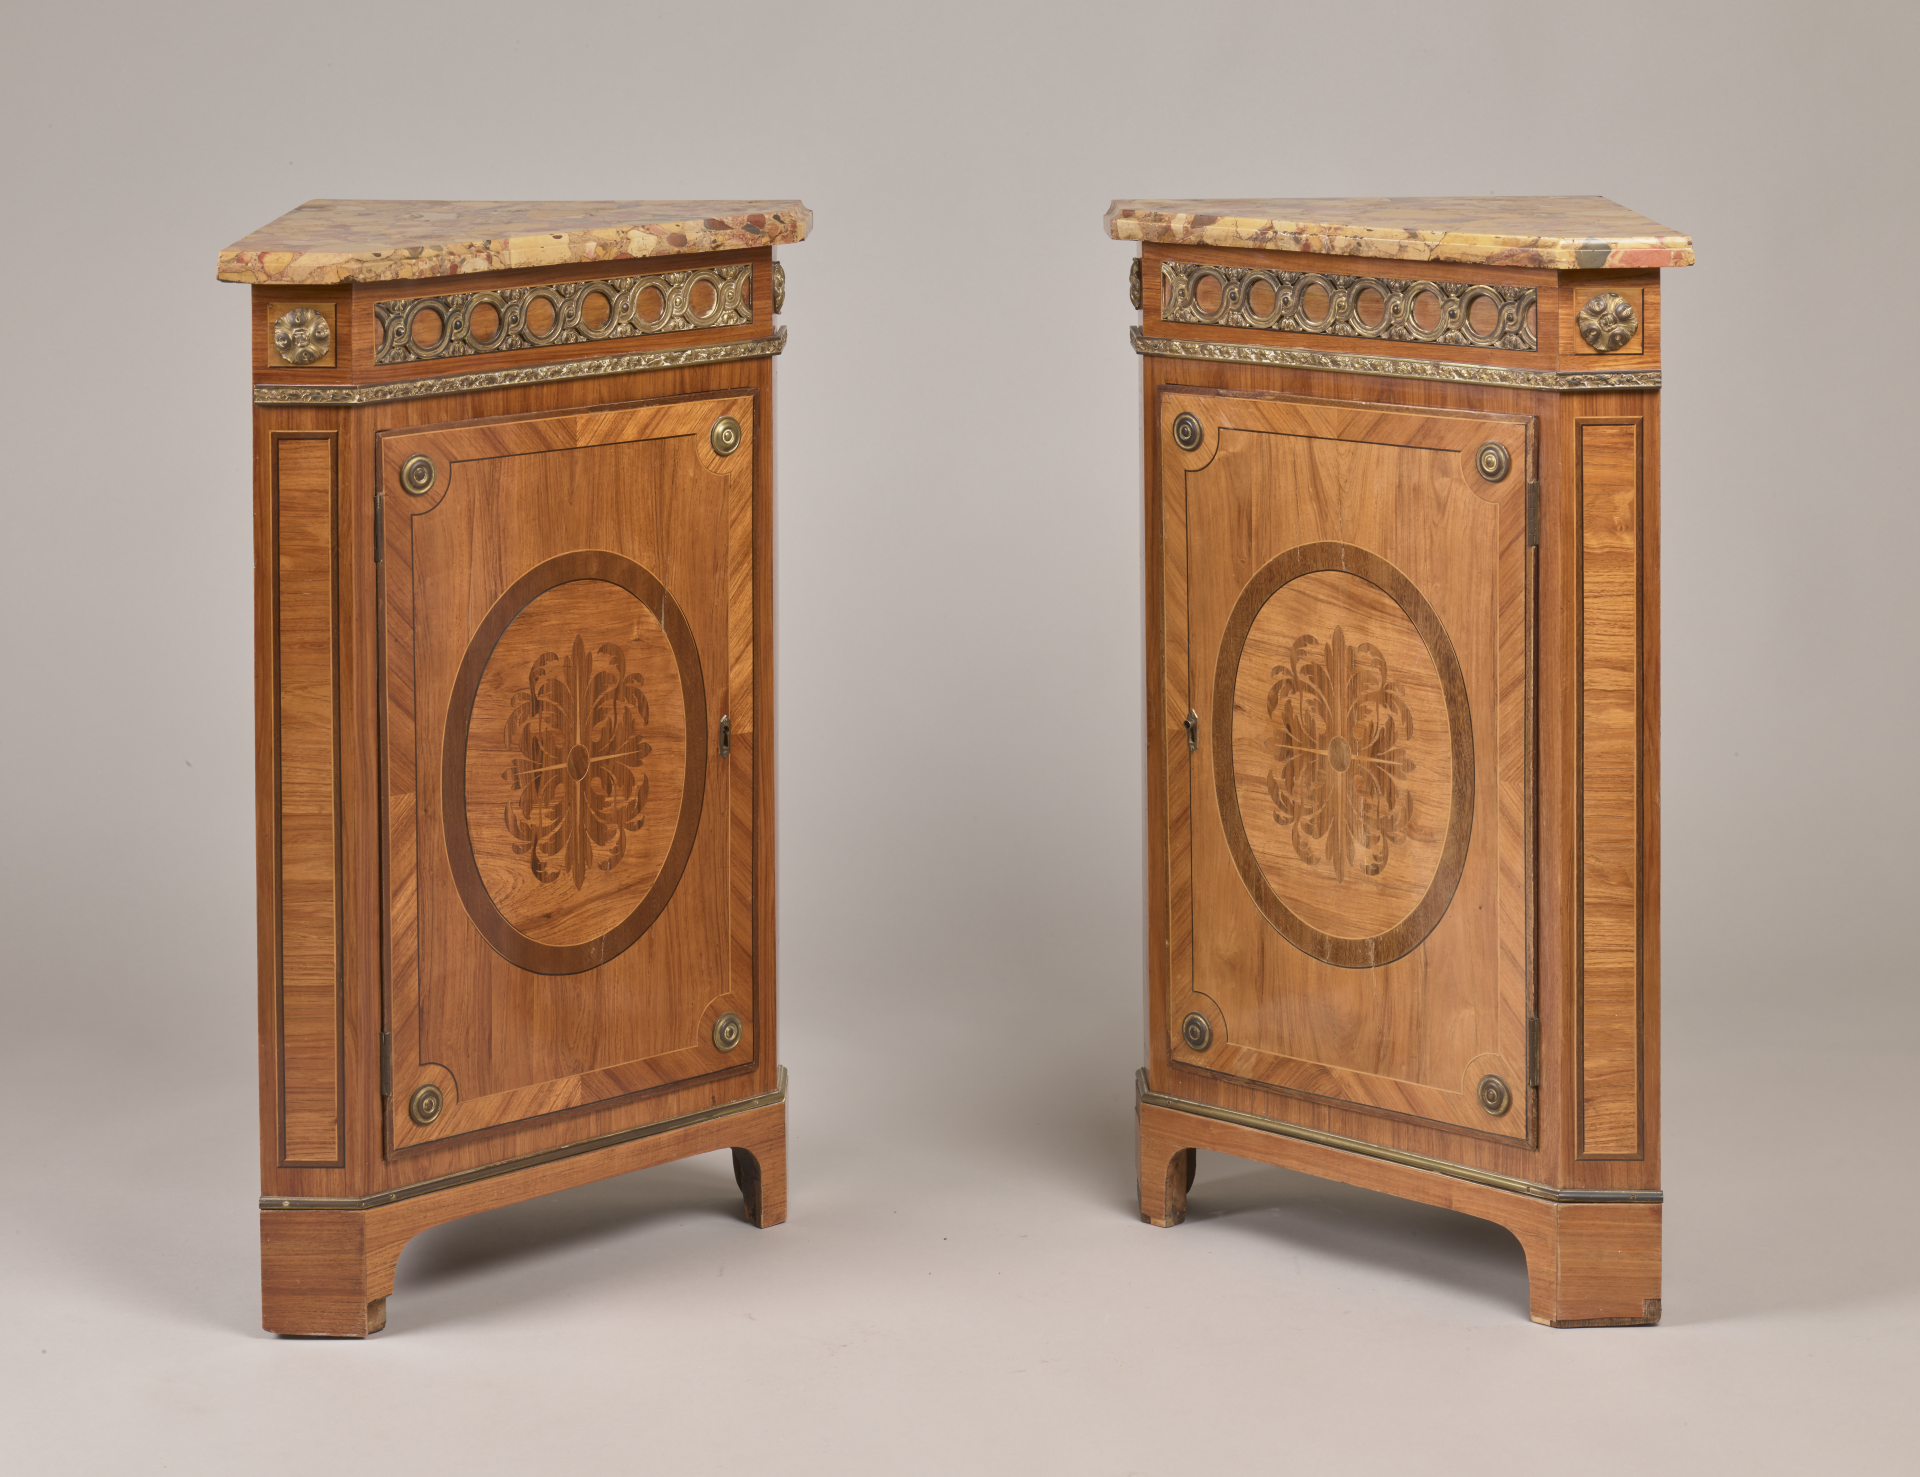 Acquisitions | Palace Of Versailles Throughout Versailles Console Cabinets (View 4 of 16)